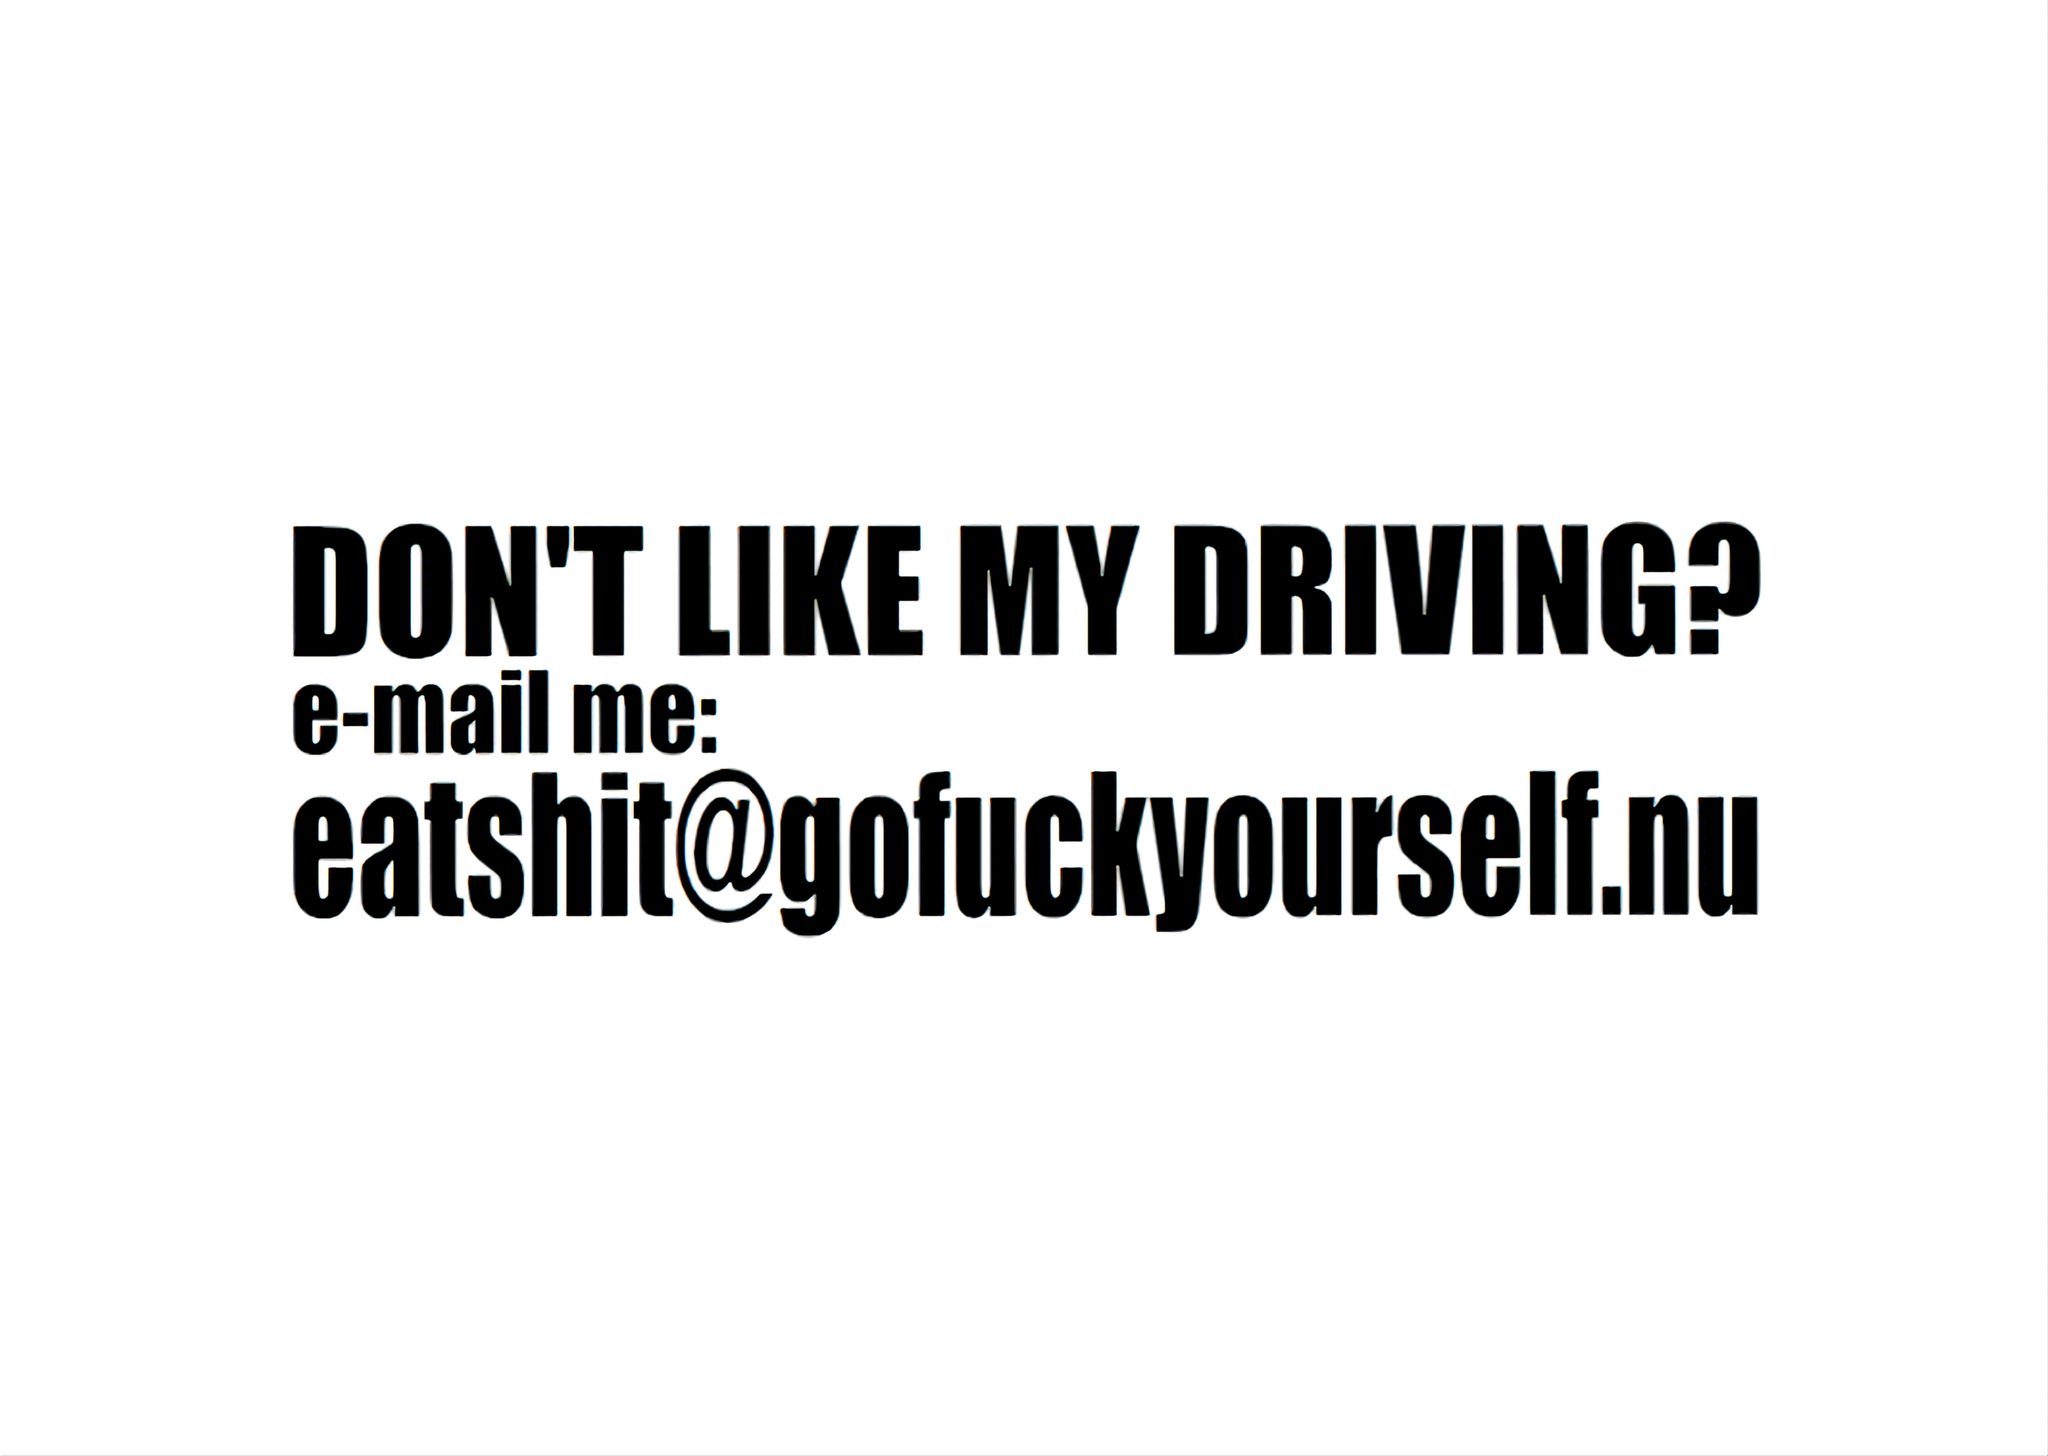 Don't like my driving